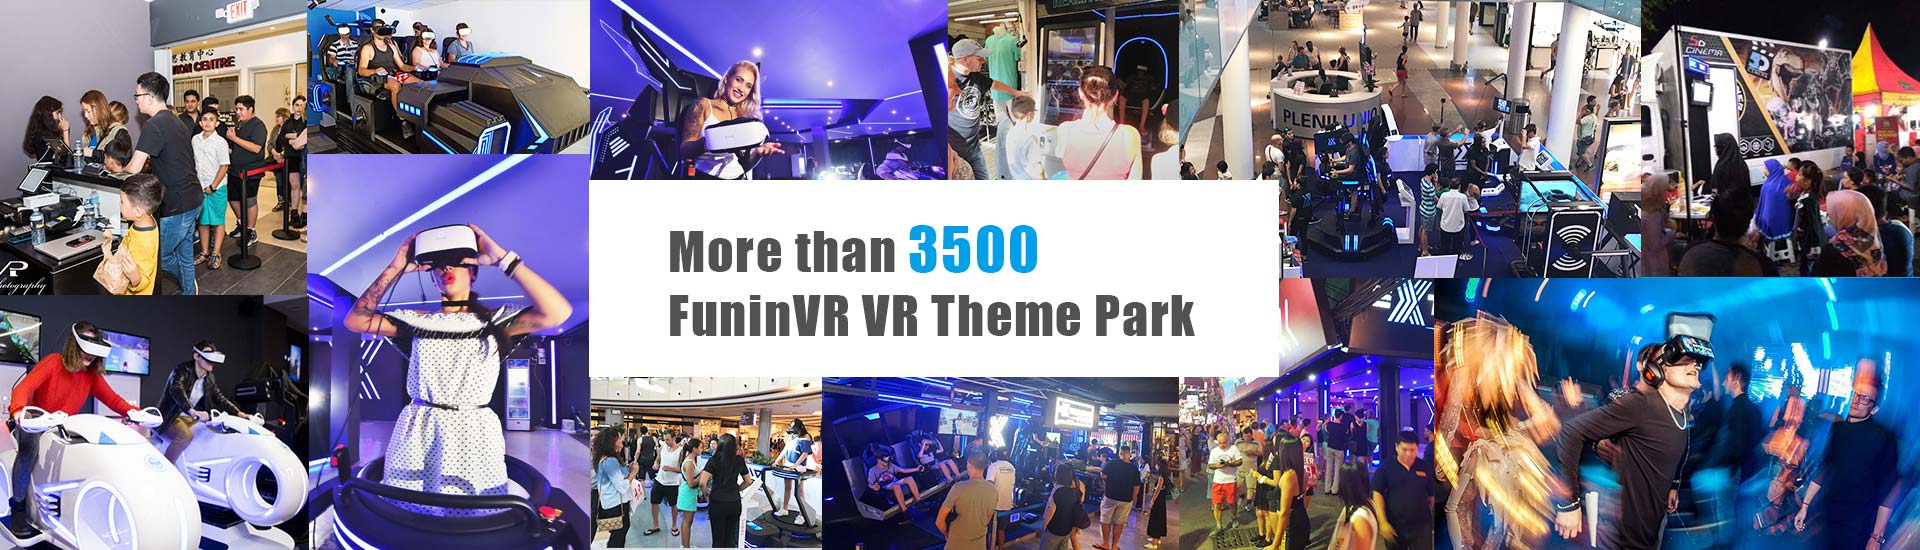 How to open a VR theme park in Hungary